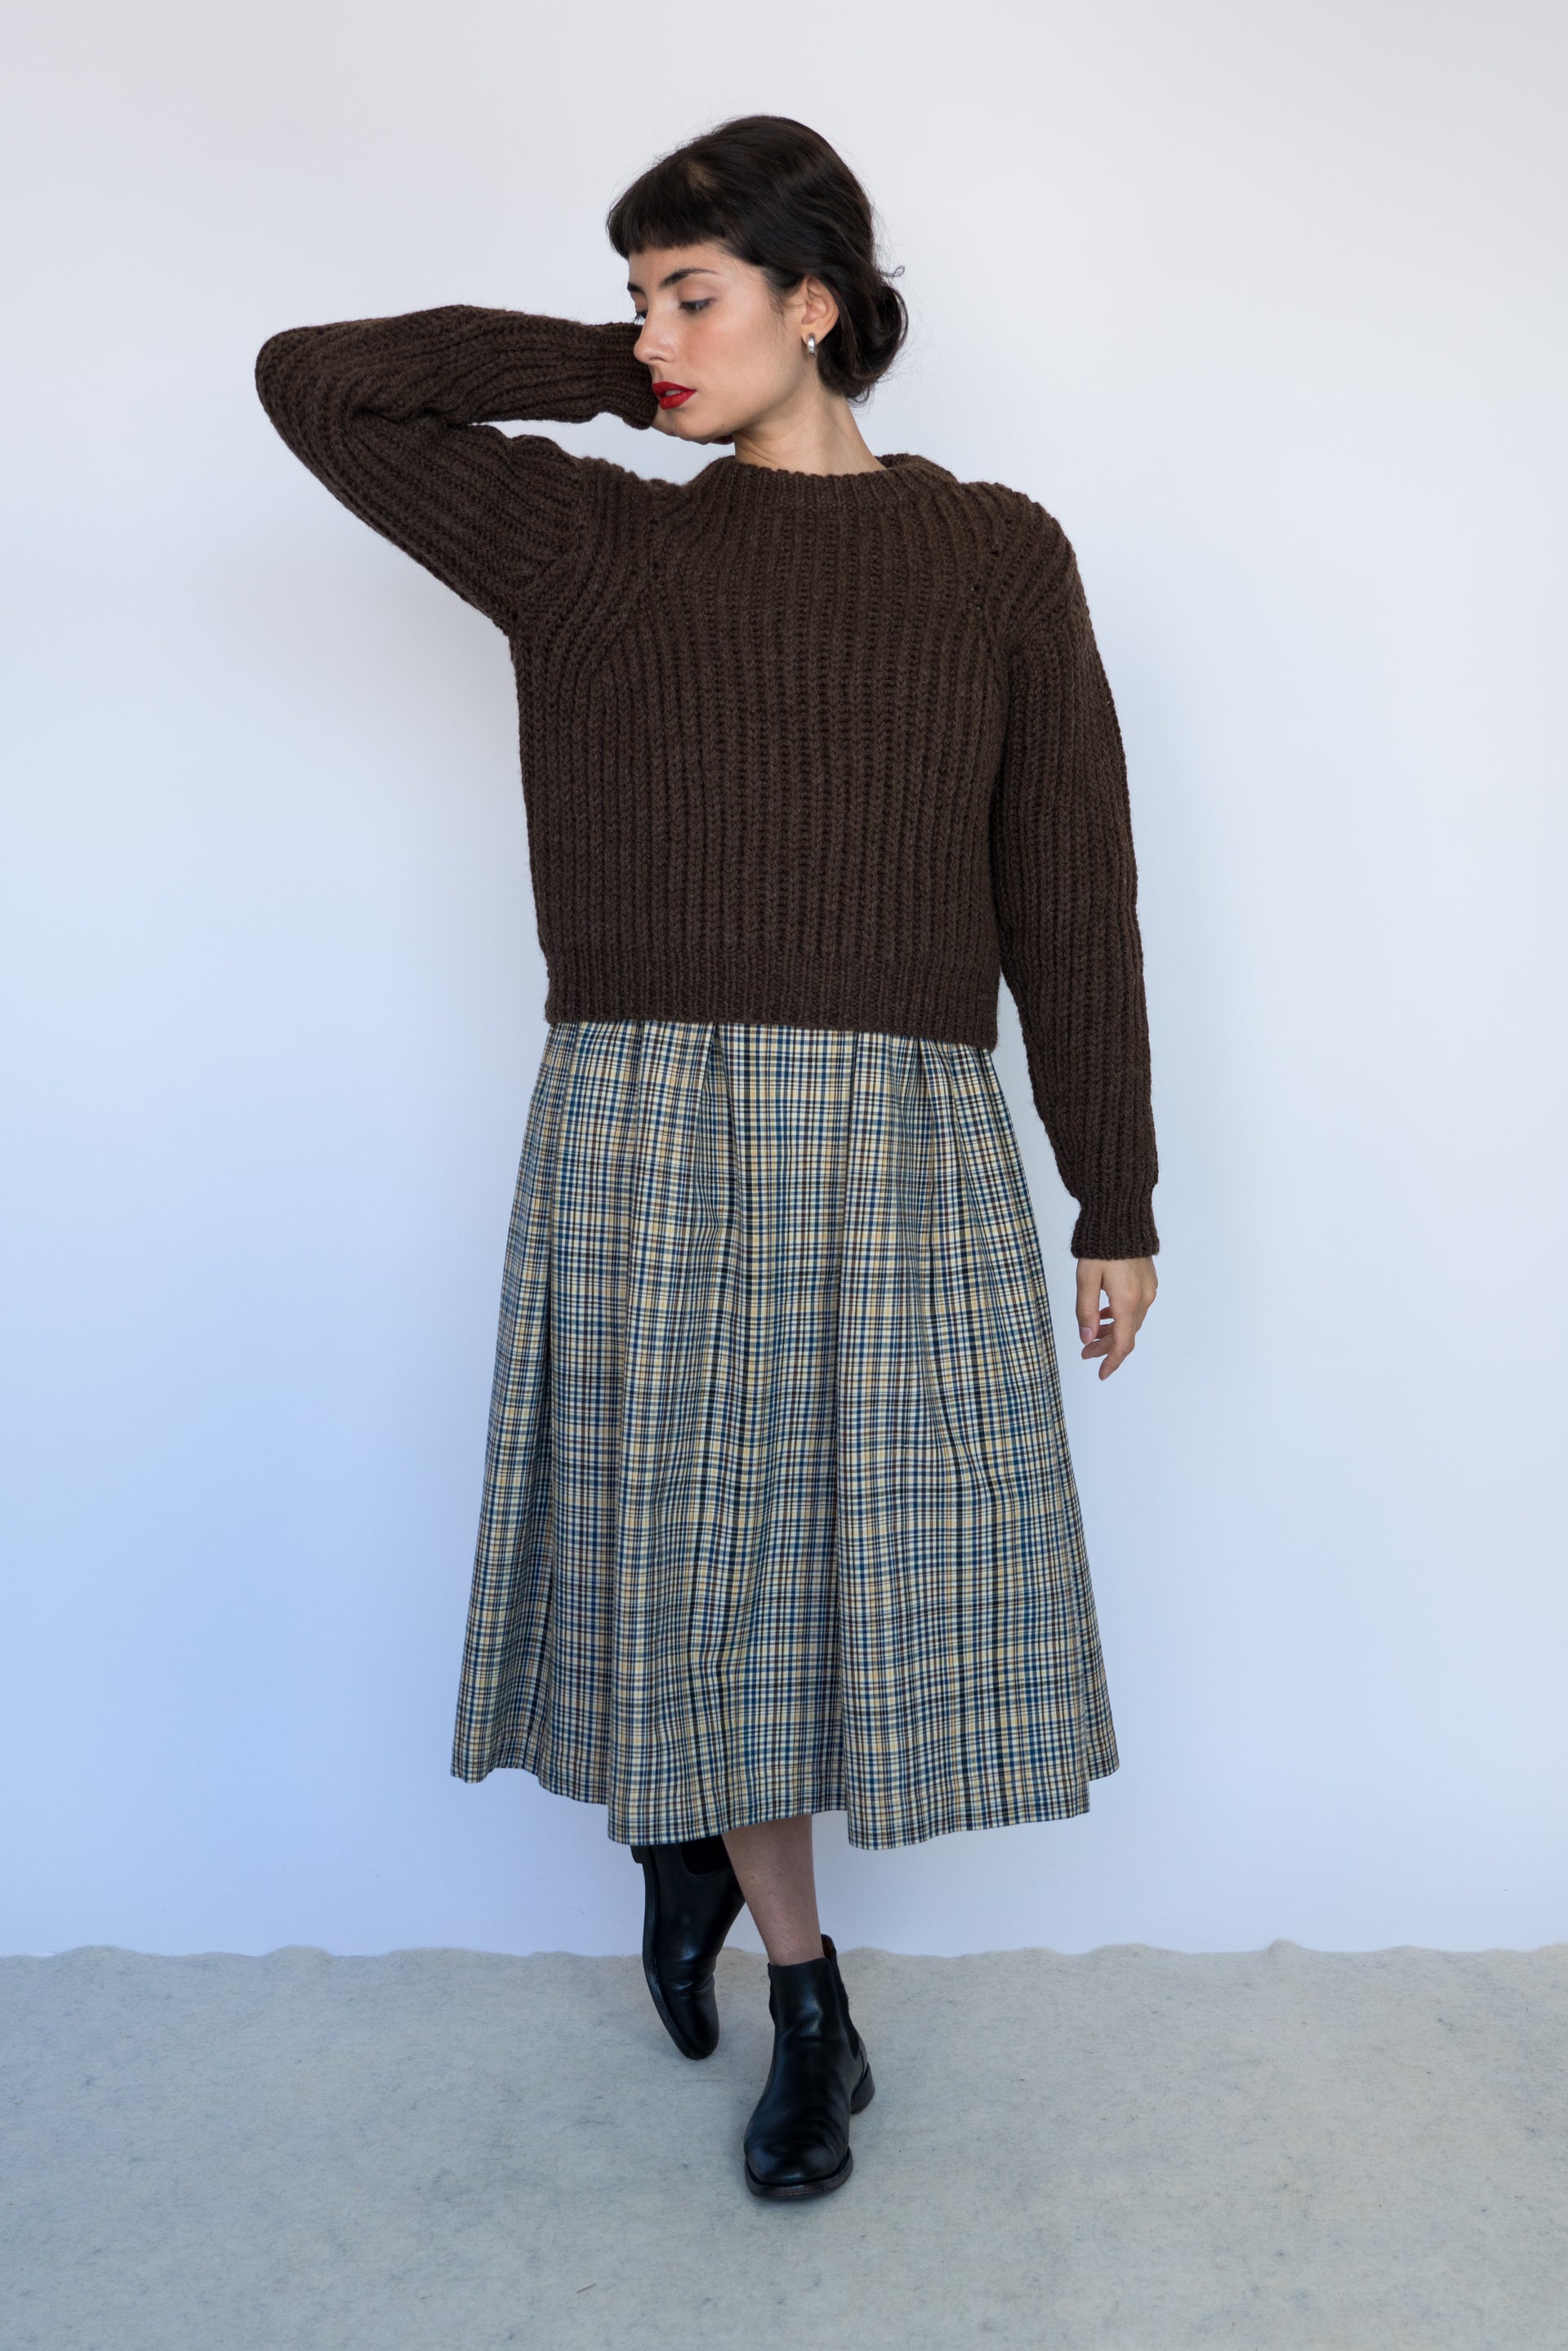 UNDYED, WOOL, HAND-KNITTED, JUMPER, SWEATER, FISHERMAN RIBB, STYLISH, SUSTAINABLE, HAND-CRAFTED, WOMENSWEAR